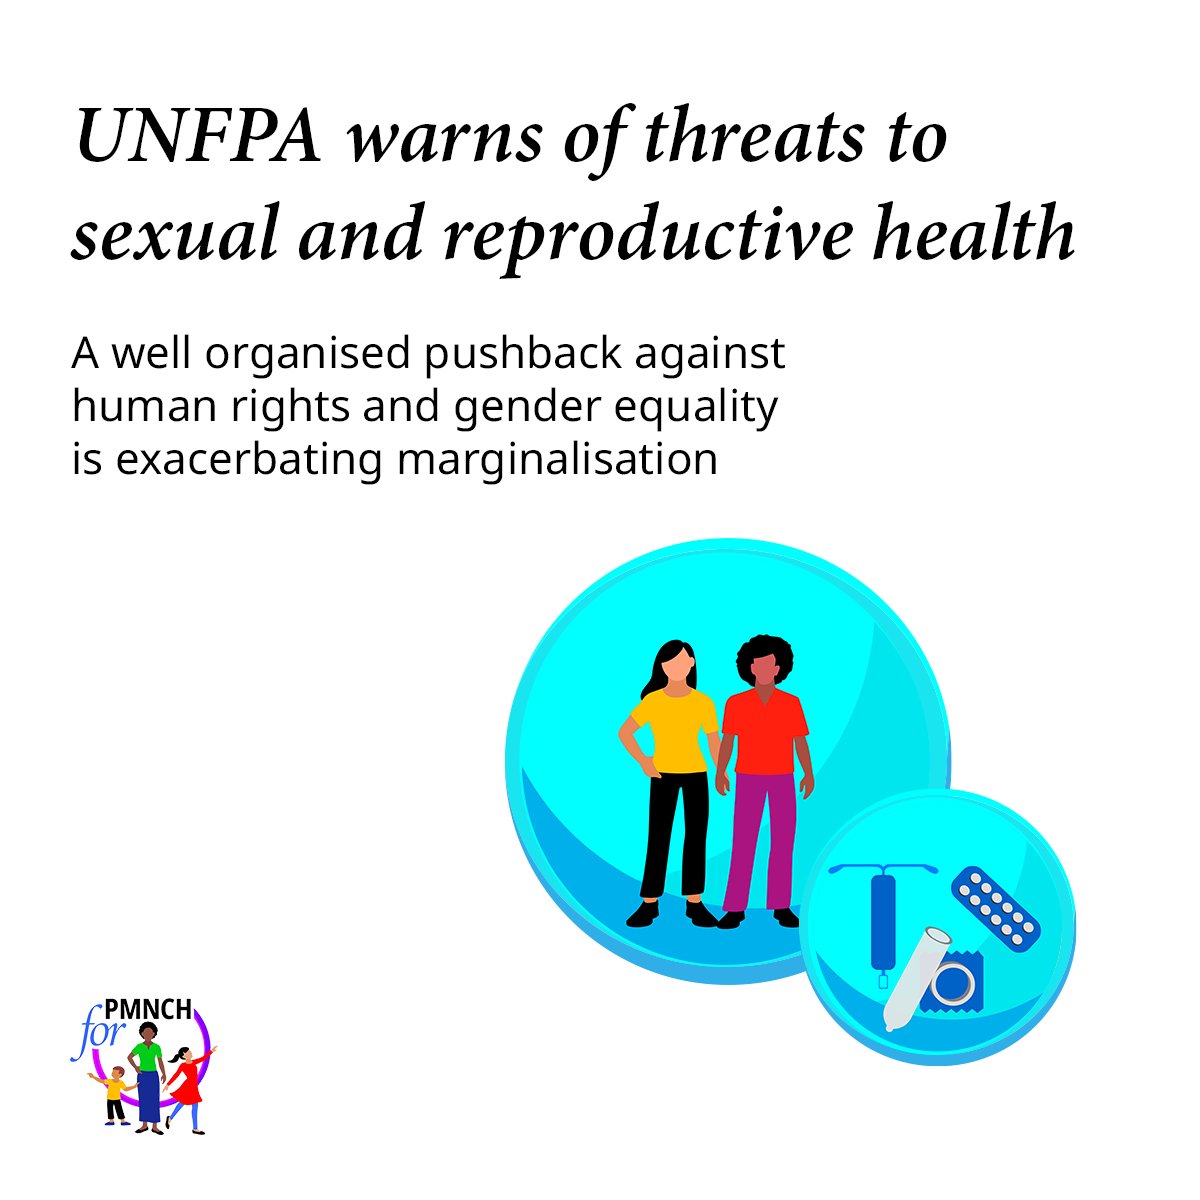 🚨 @UNFPA warns of threats to #SRHR due to political and social polarisation. Marginalised communities disproportionately affected. Find out why urgent action is needed: 👇 pmnch.who.int/news-and-event…